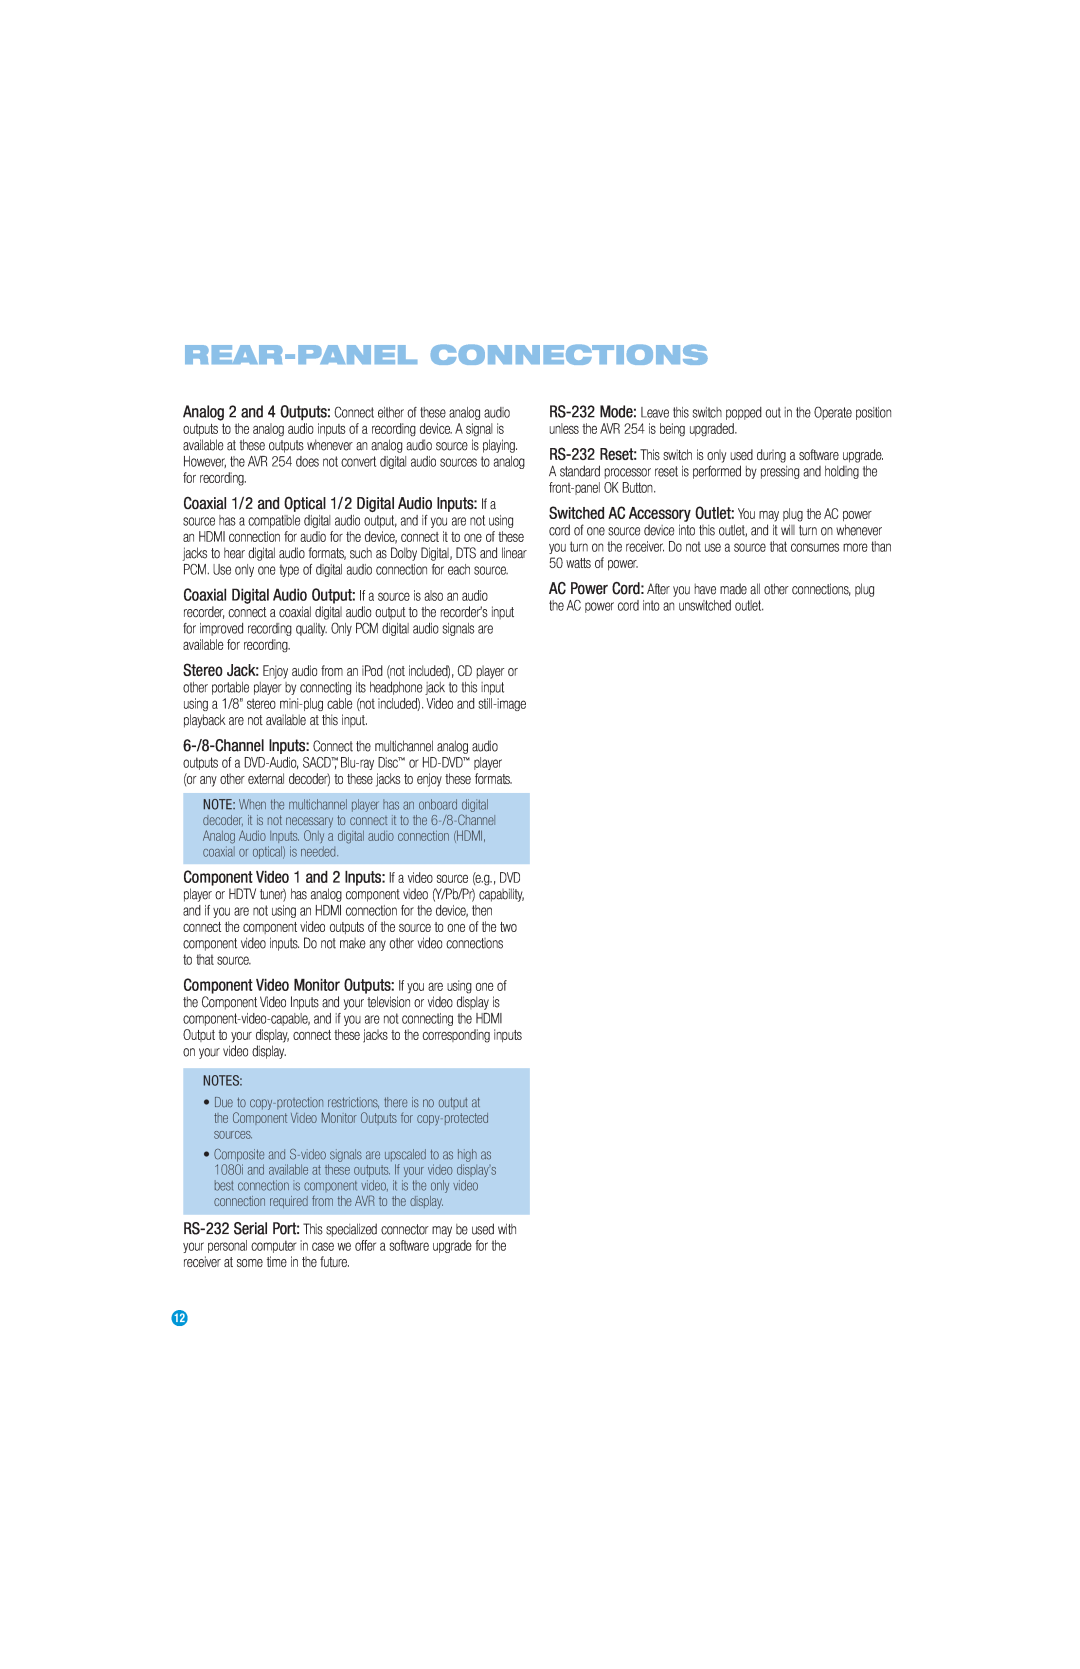 Harman-Kardon AVR 254 owner manual Rear-Panelconnections, to that source 